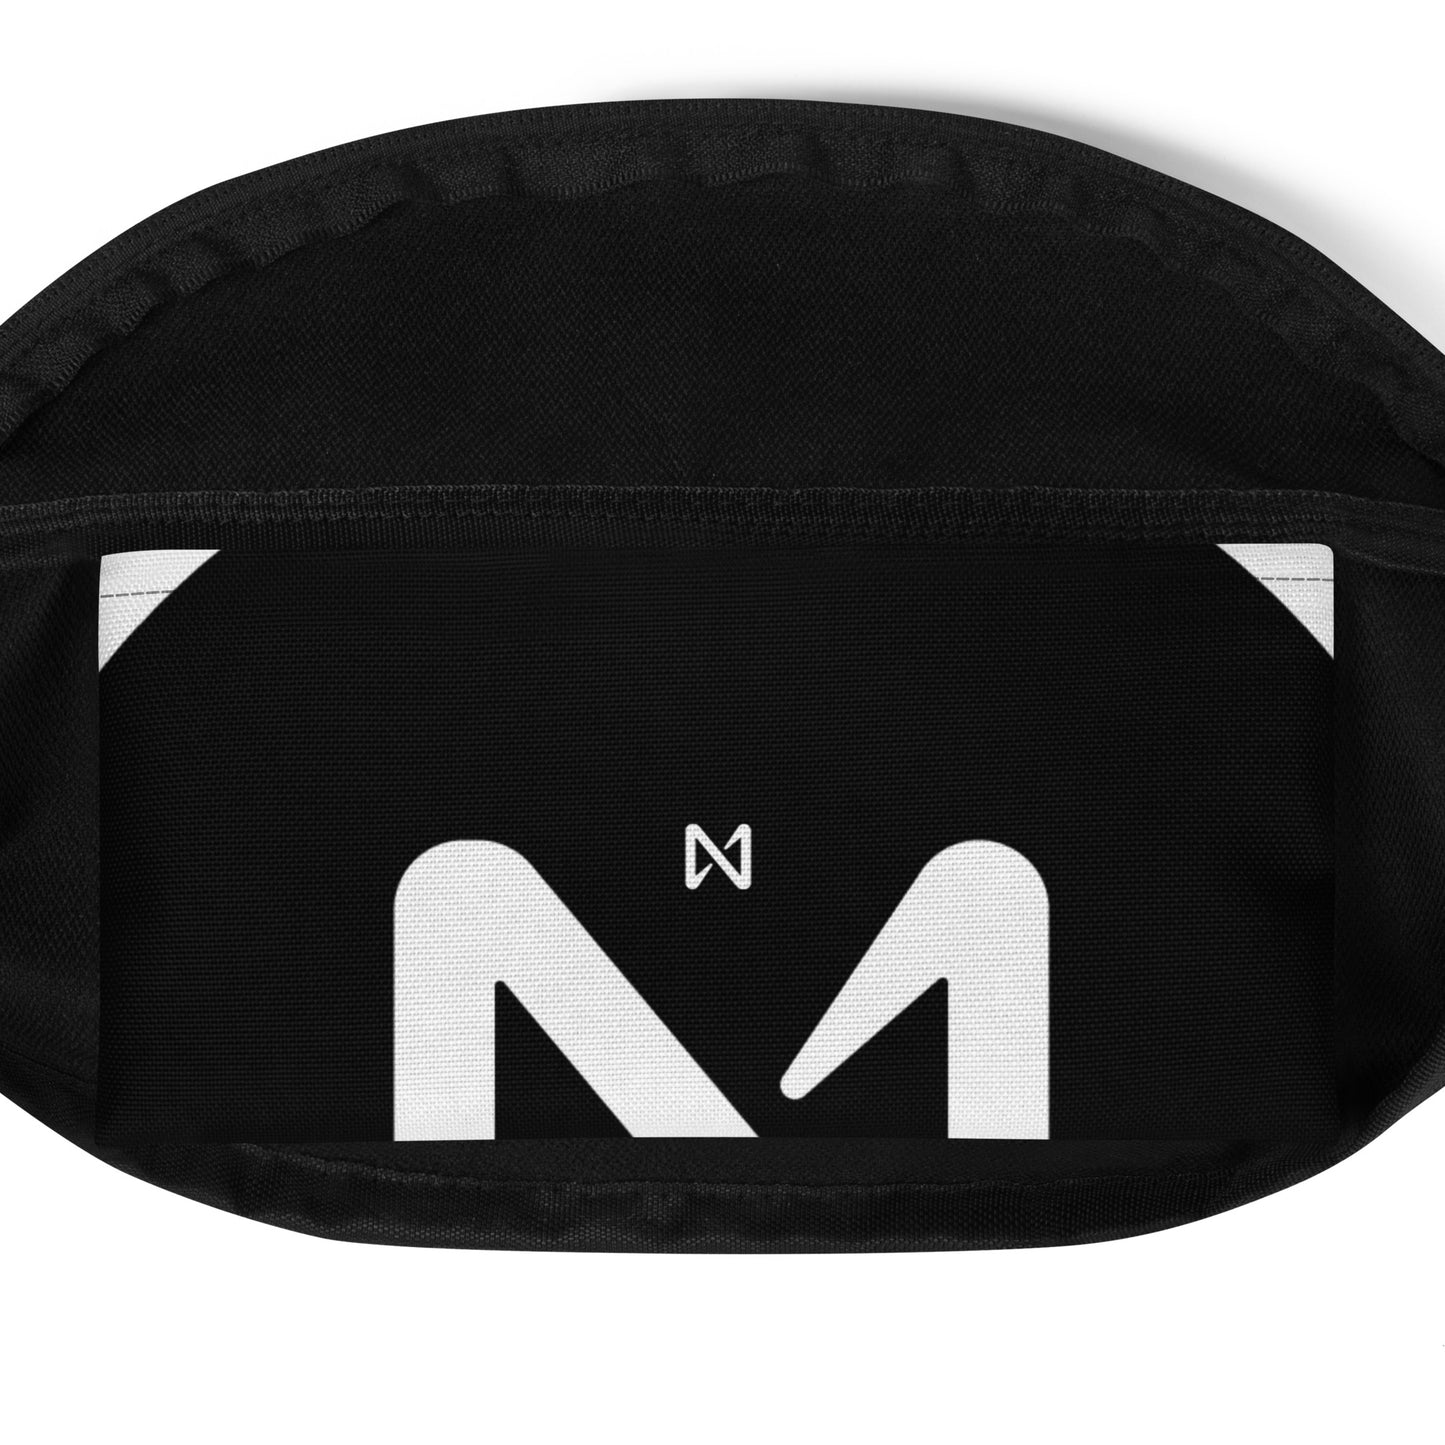 NEAR CIRCLE ICON ALLOVER PRINT Fanny Pack